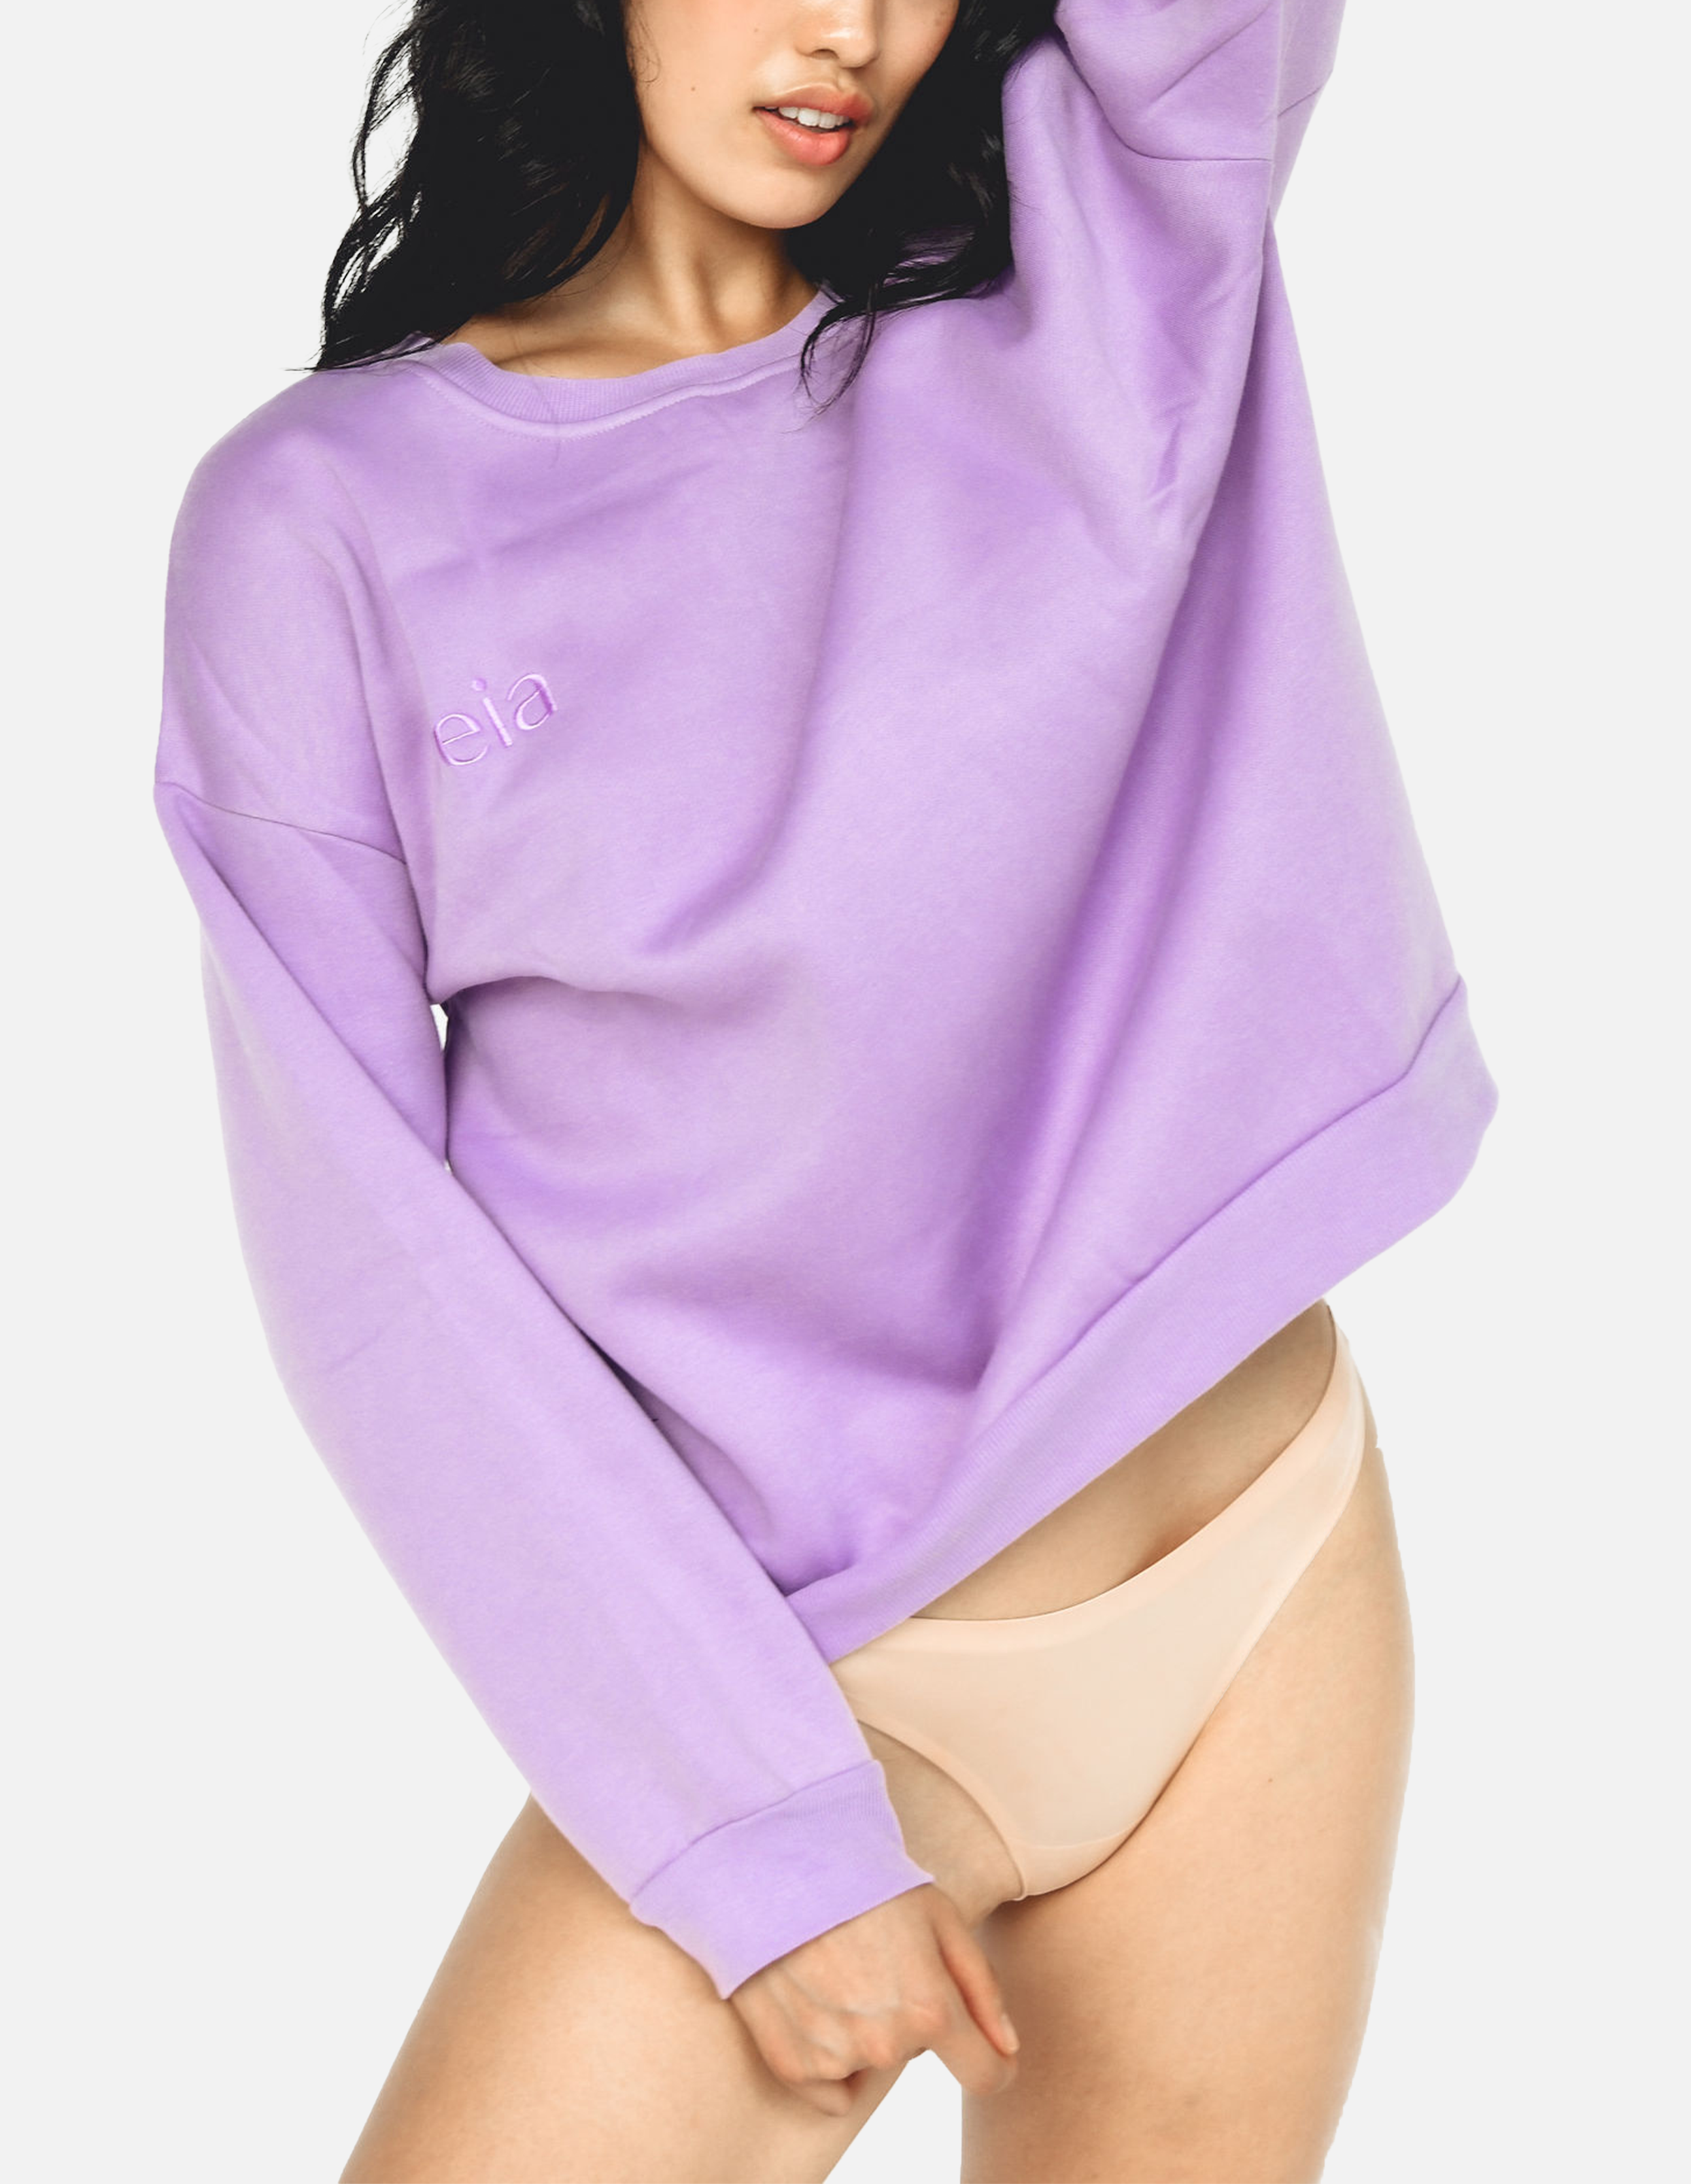 beia sweater model 1